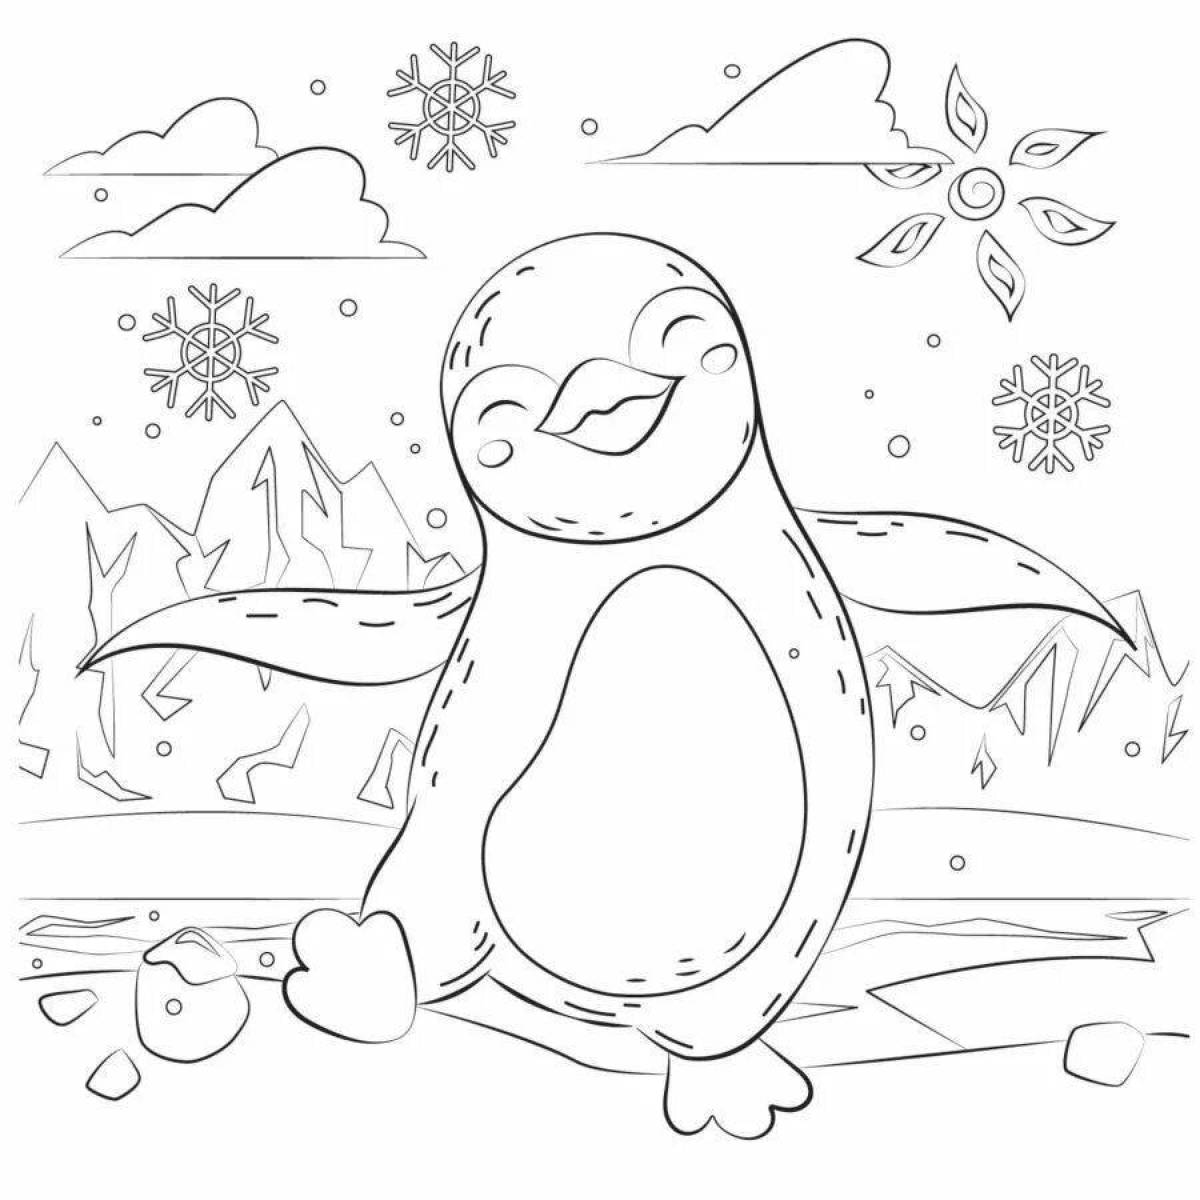 Coloring page happy penguin on ice